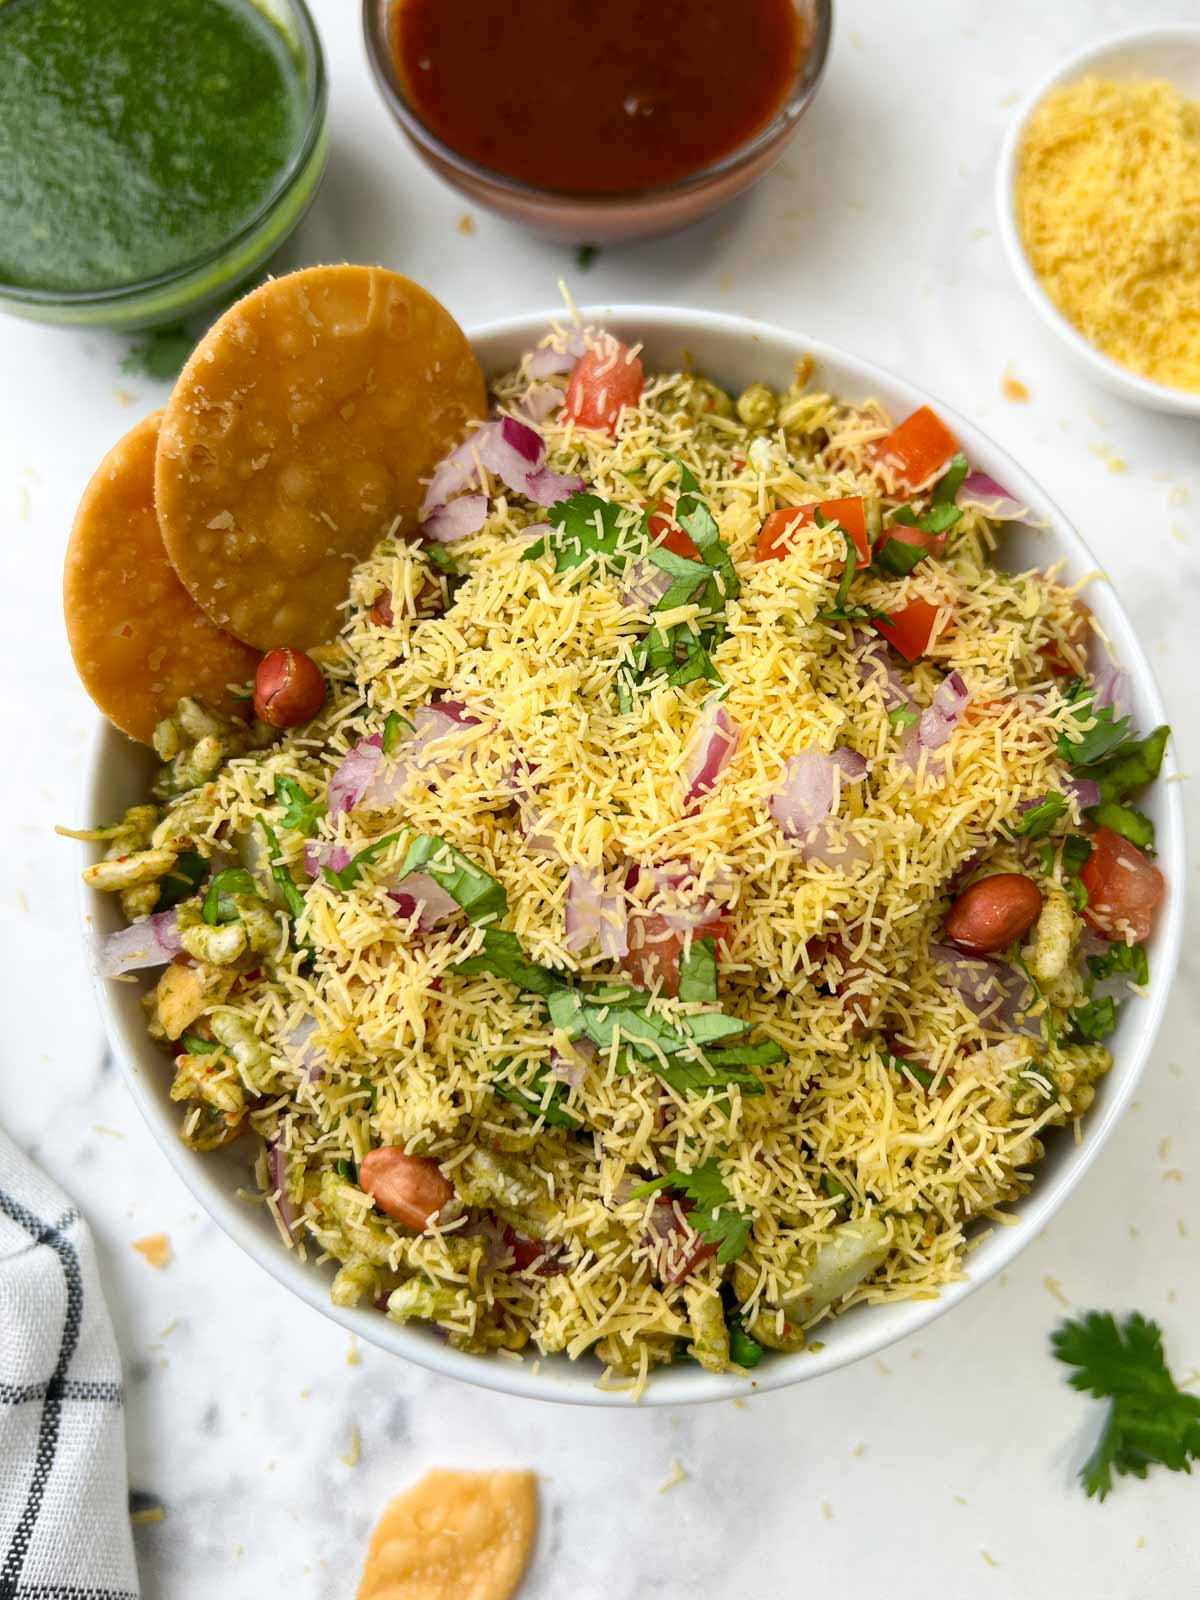 bhel puri chaat served in a white bowl garnished with sev and papdi on the side with green chutney and tamarind chutney on the side